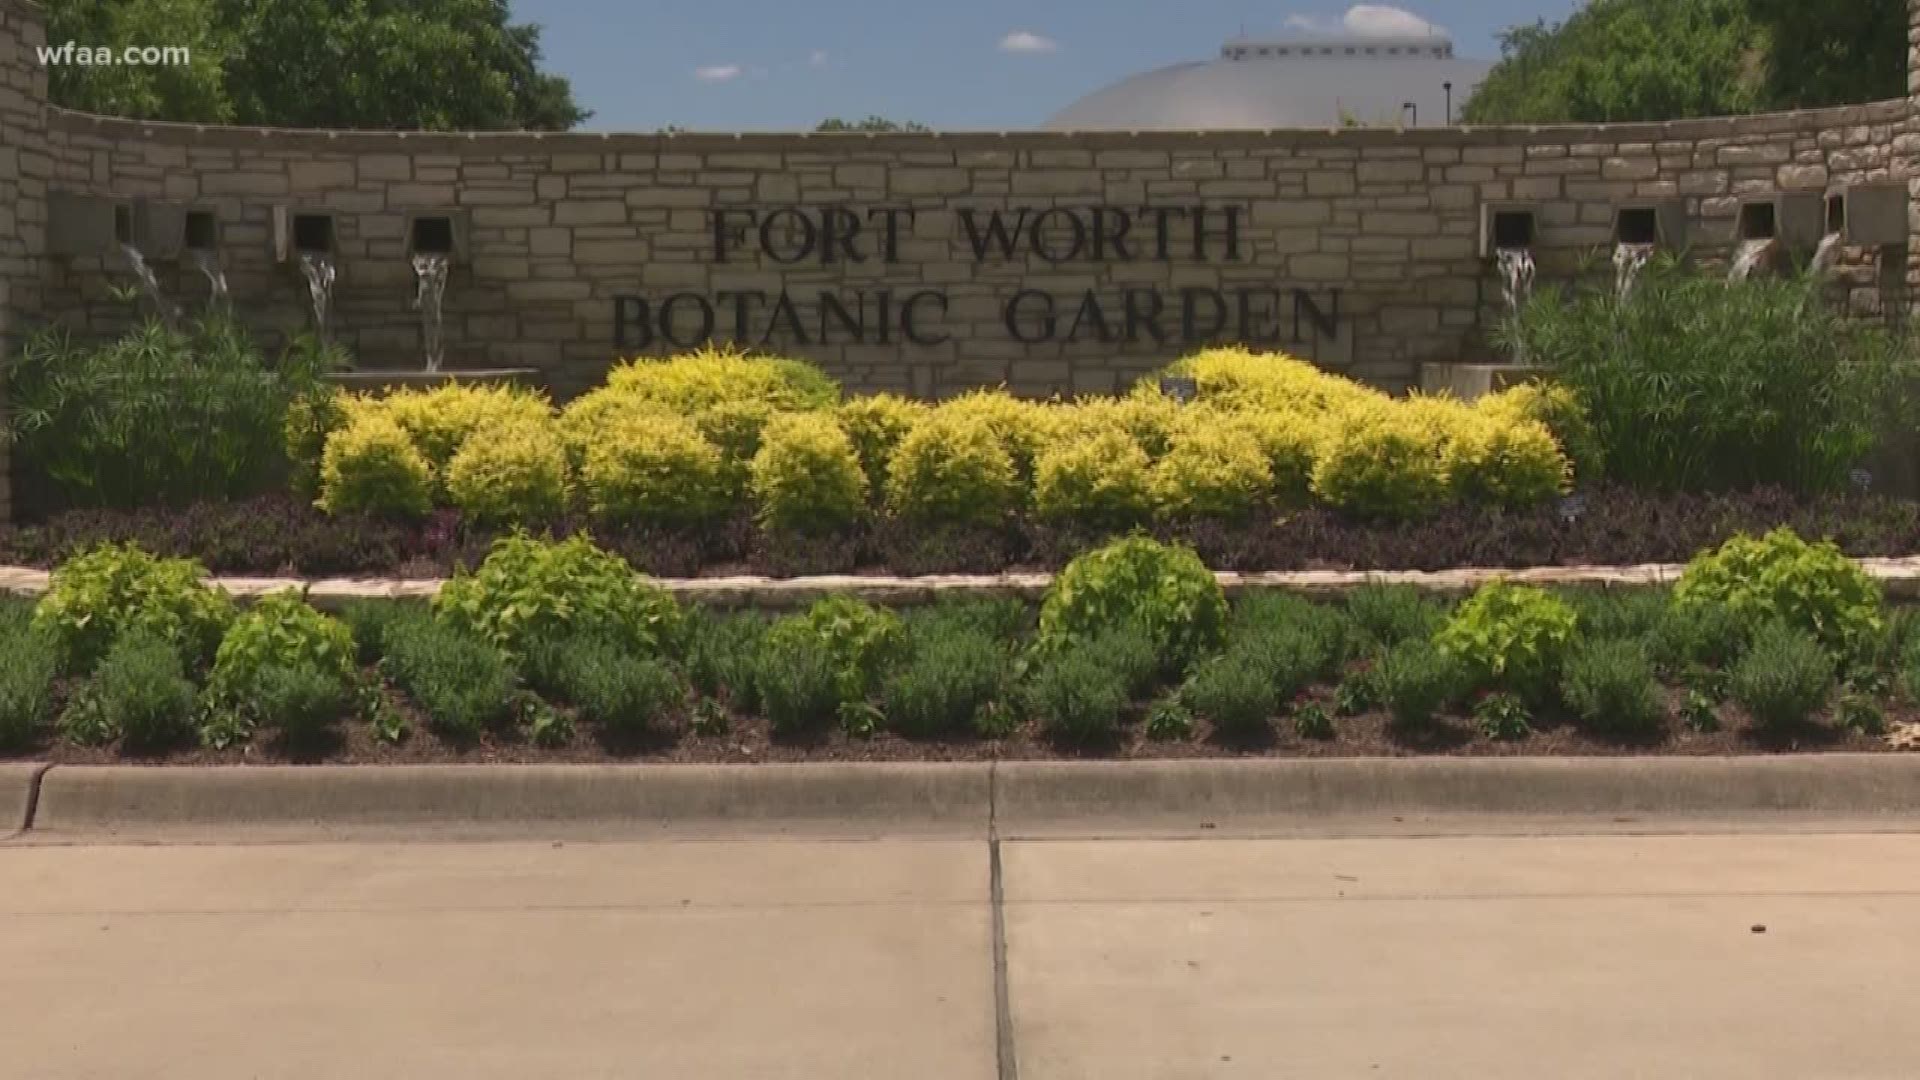 Just because the Fort Worth Botanic Garden is going to start charging doesn't mean you have to pay.